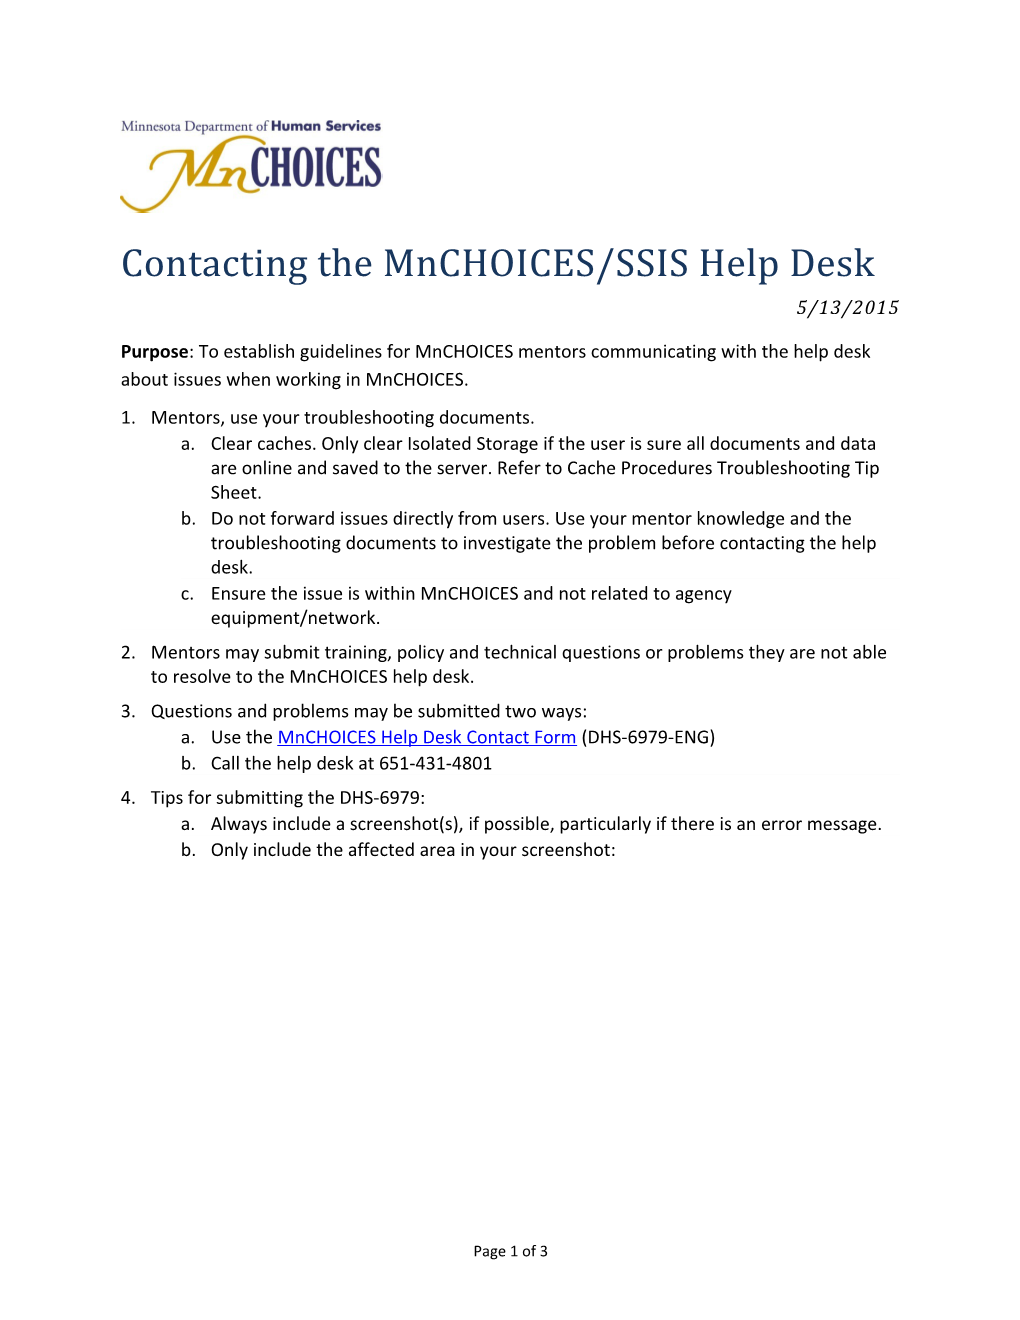 Contacting the Mnchoices/SSIS Help Desk